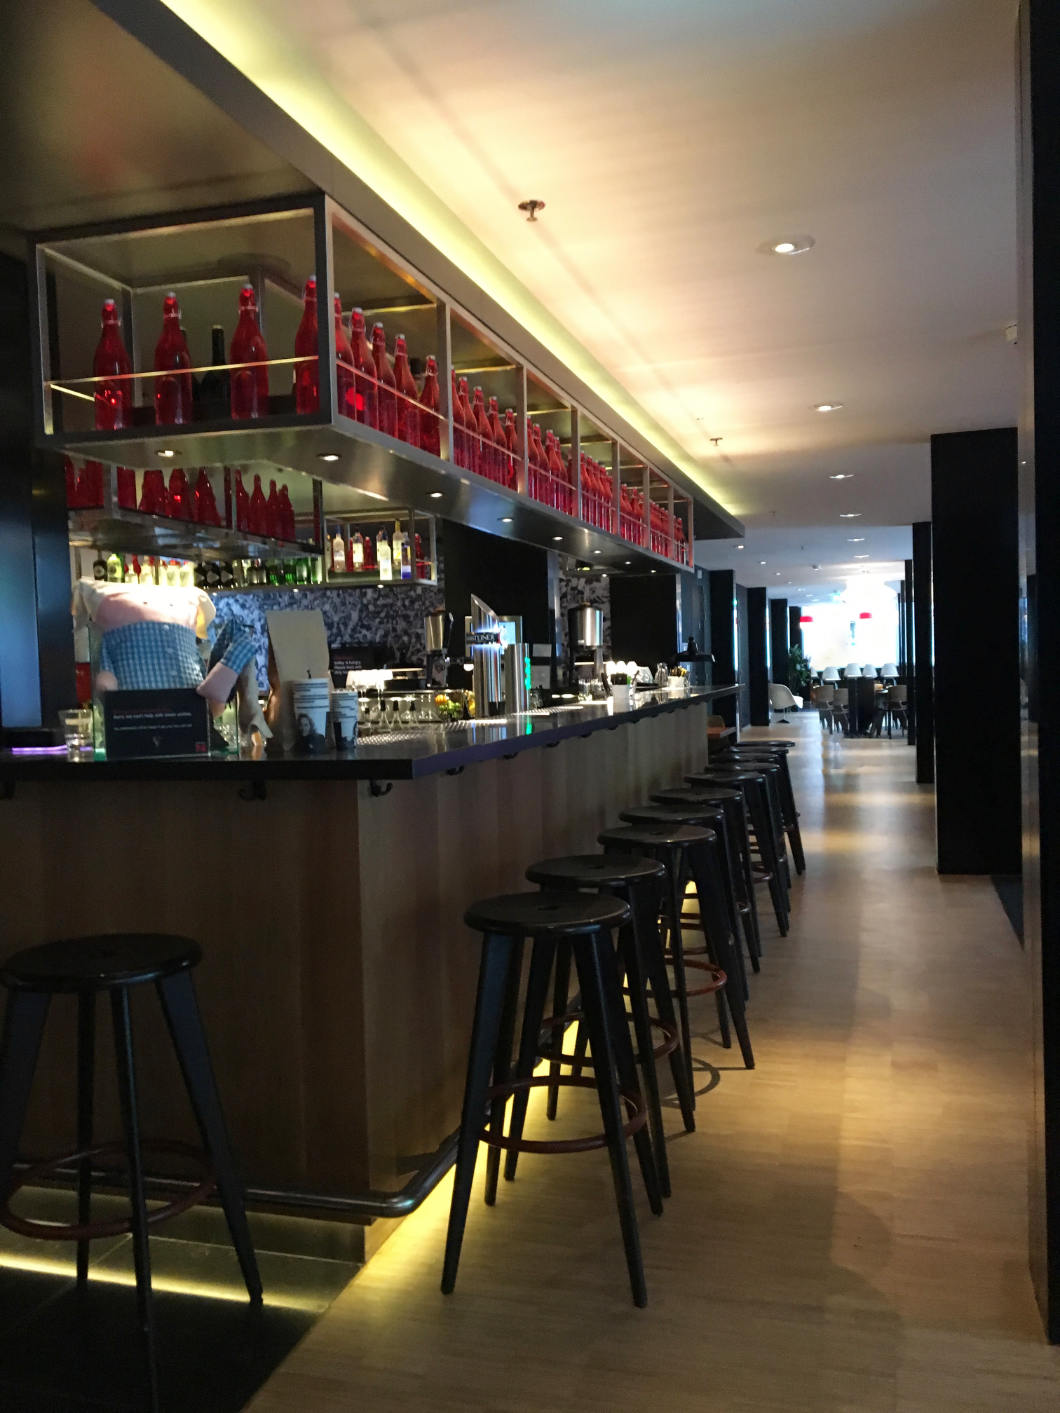 CitizenM Amsterdam South Hotel - a great hotel for your city break